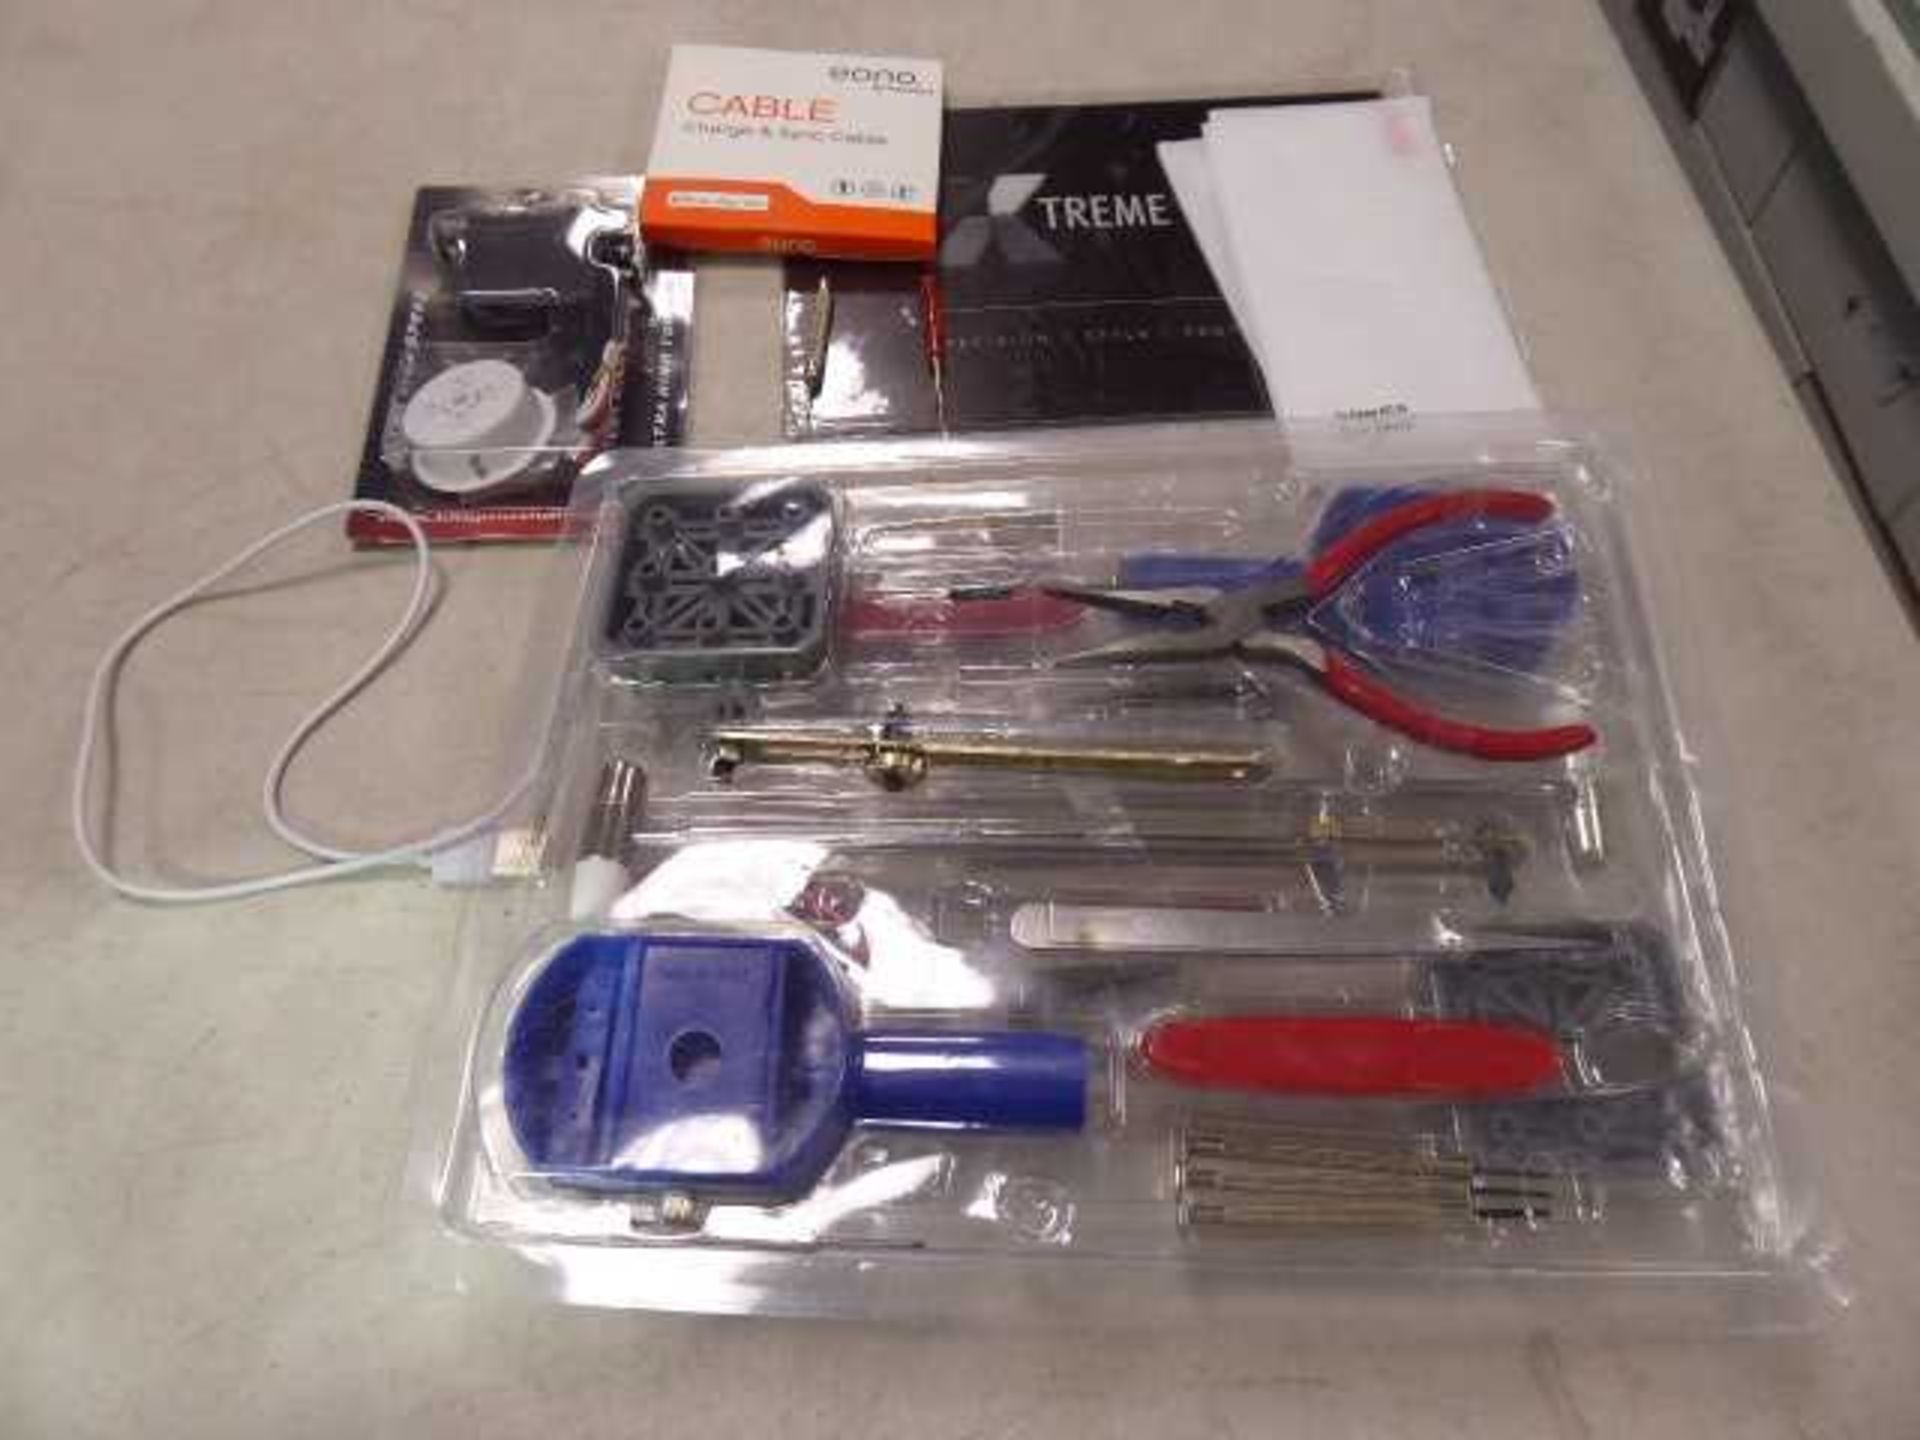 +VAT 2 mini tool kits, mobile screen protectors, Eono charge & sync cable, Ultra High Speed Sail